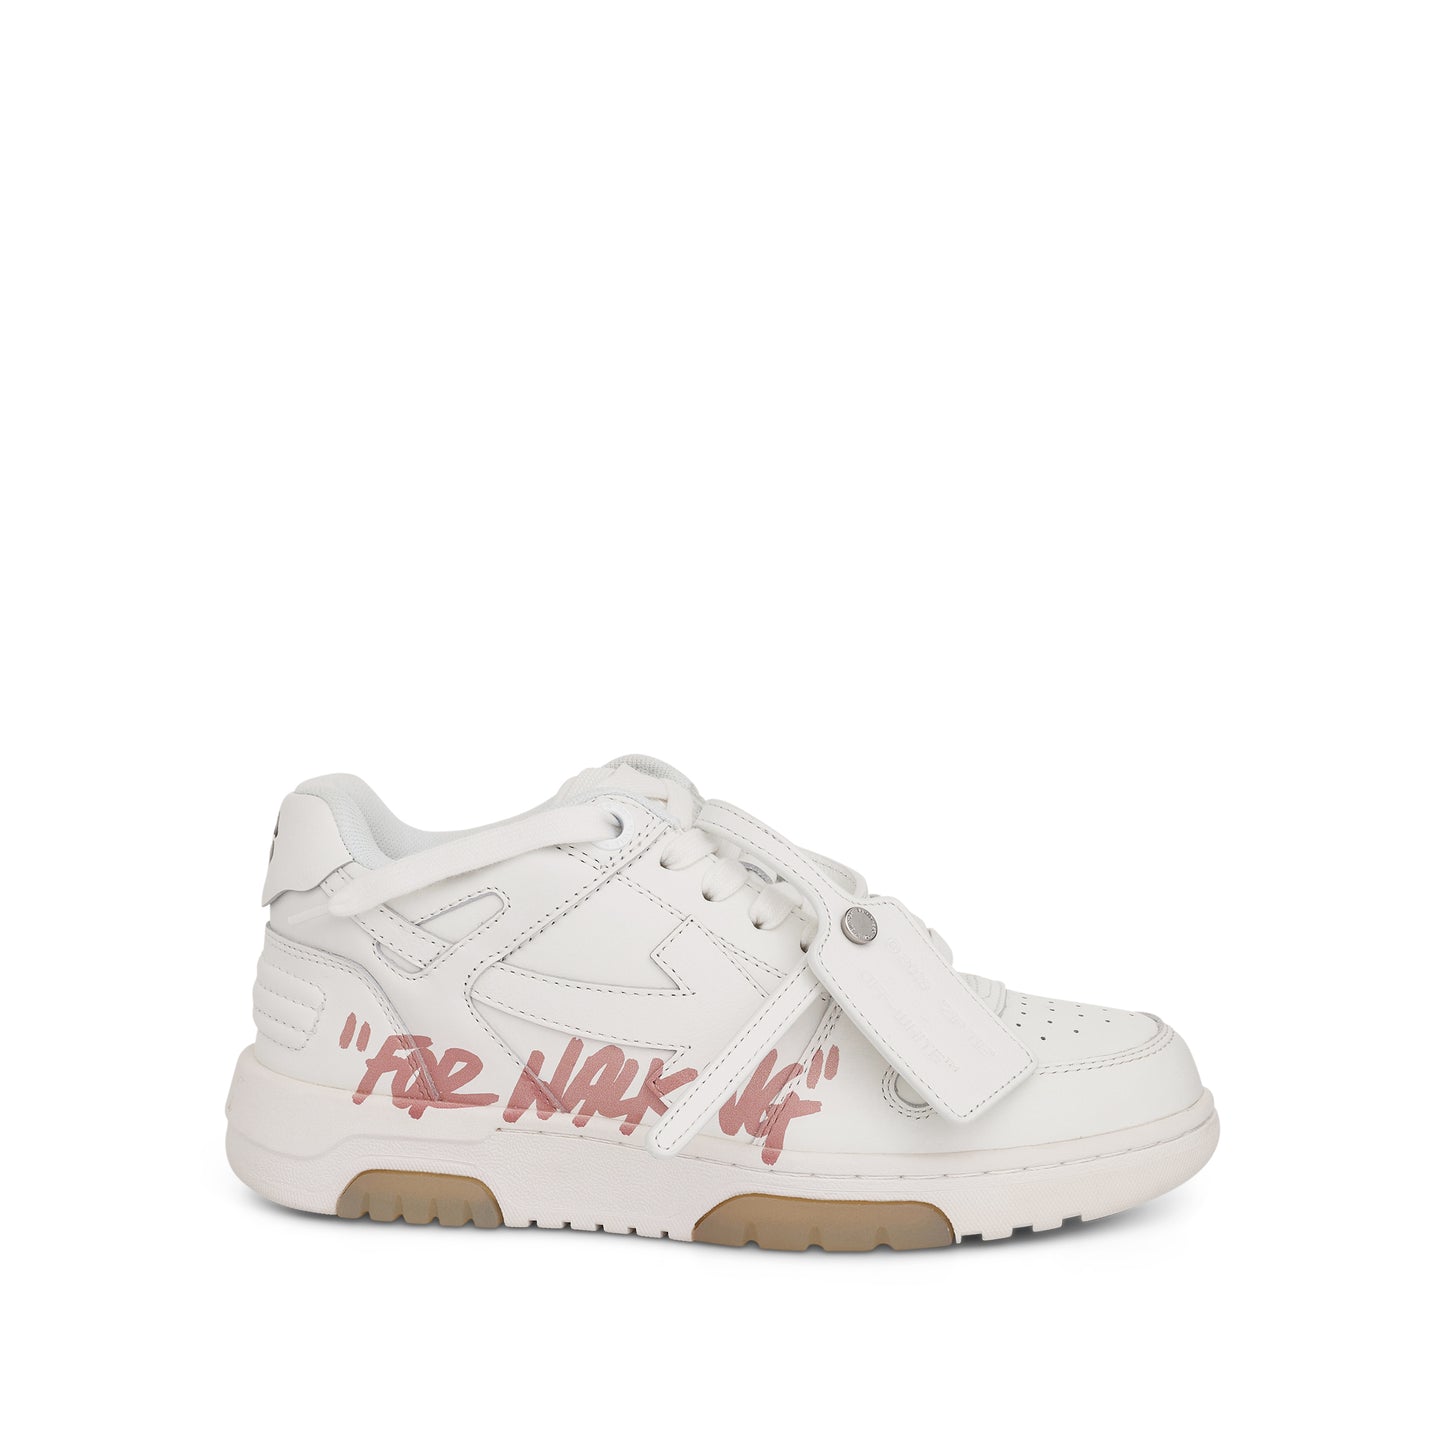 Out Of Office "For Walking" Sneaker in White/Pink